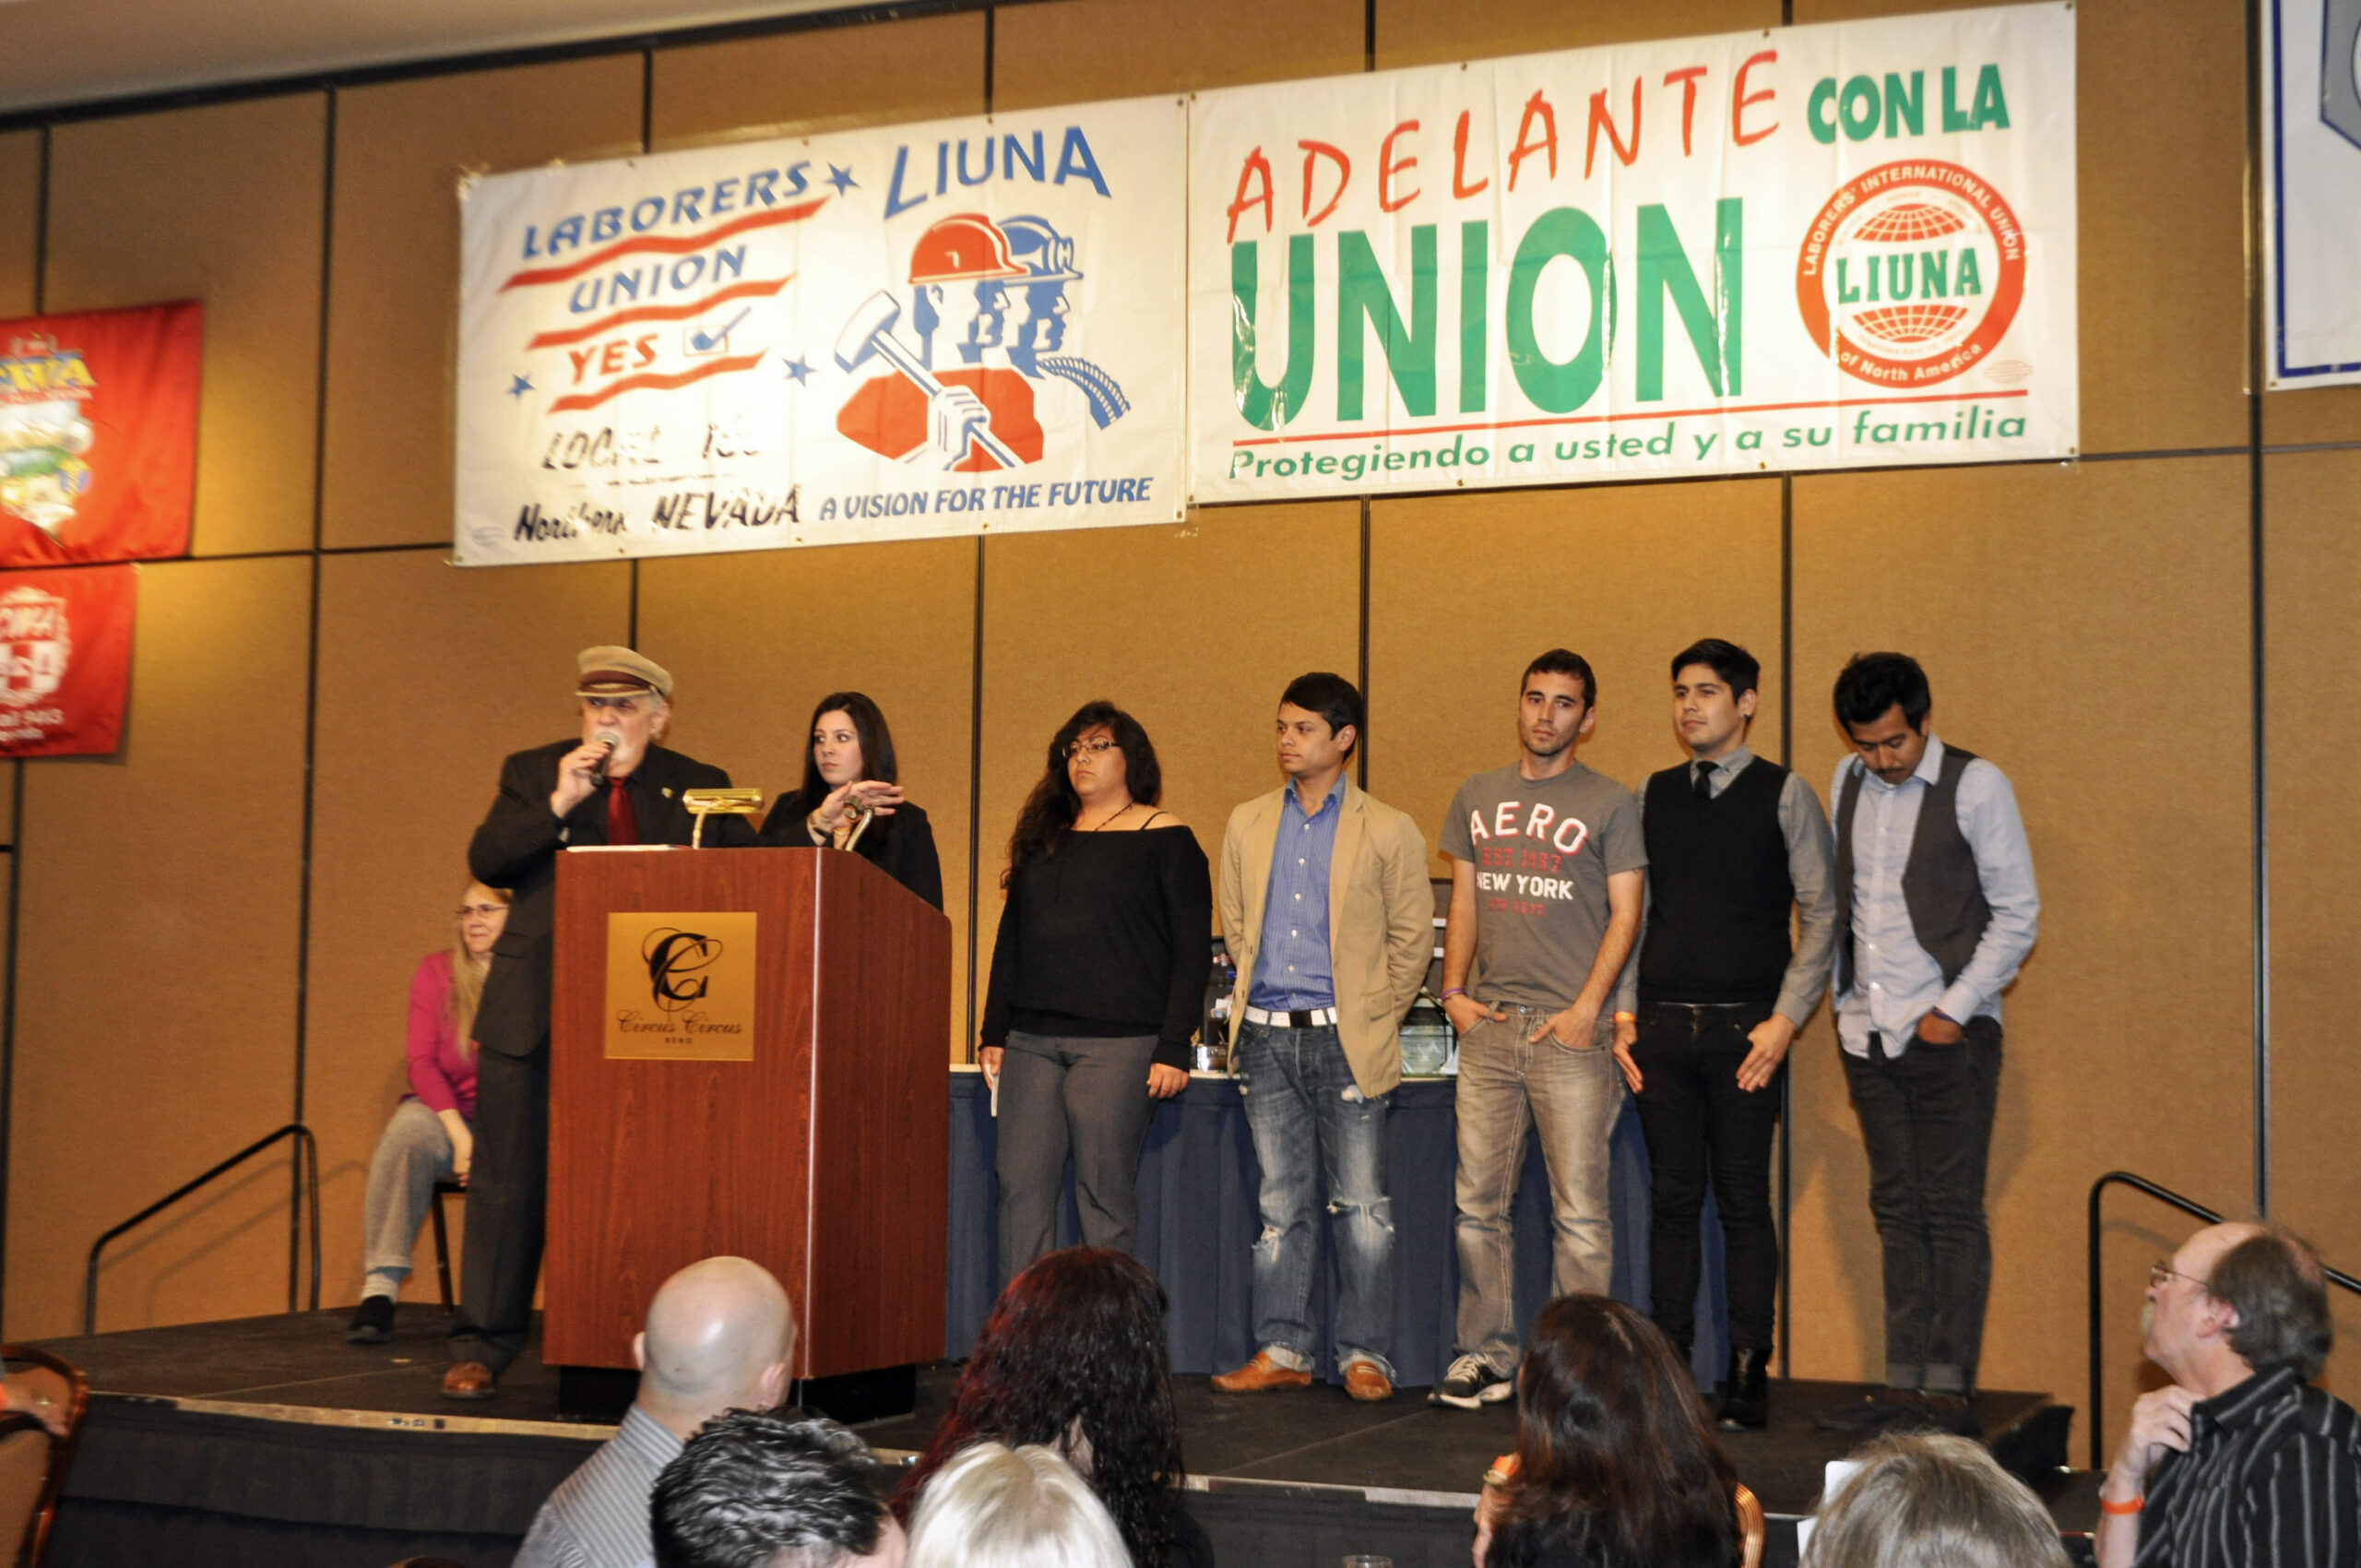 Students on stage with union banners behind them